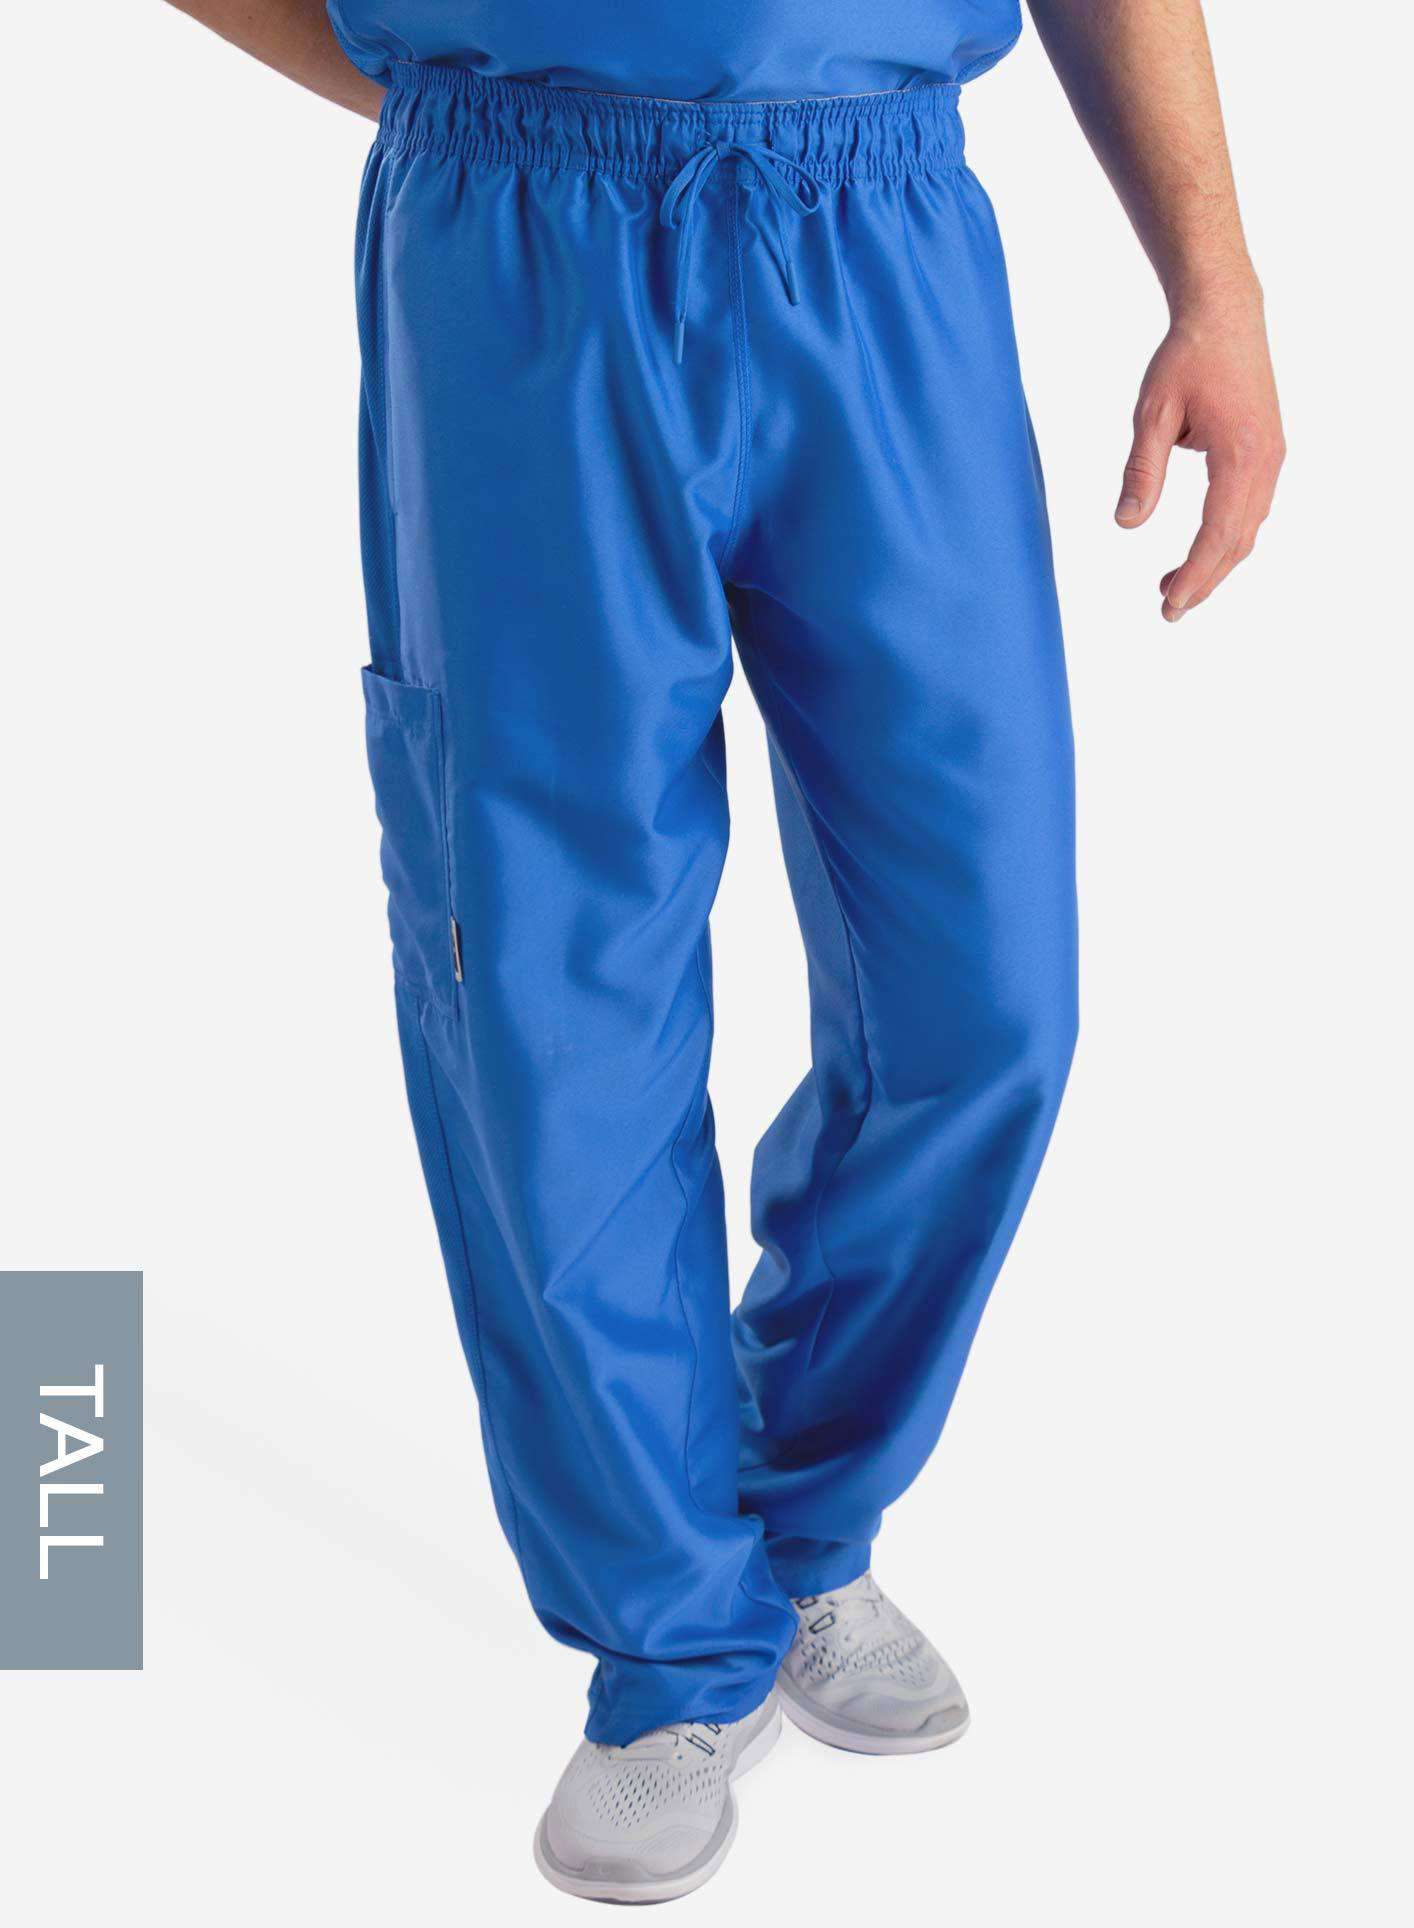 mens Elements tall relaxed fit scrub pants royal-blue